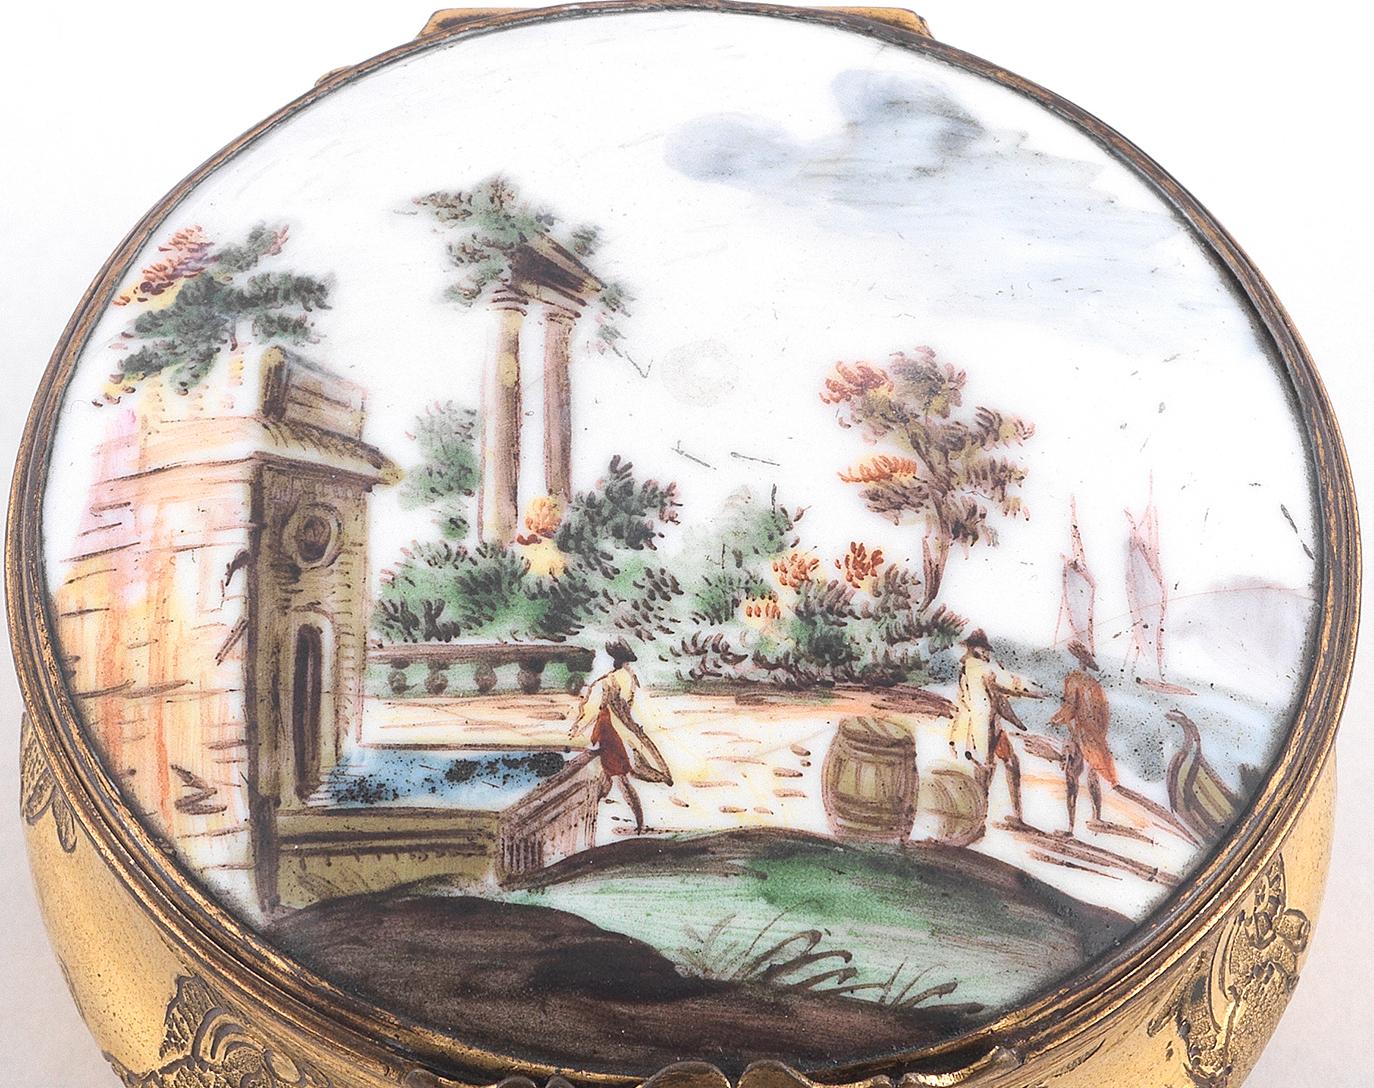 enamelled or lacquered metal were popular in the 18th century